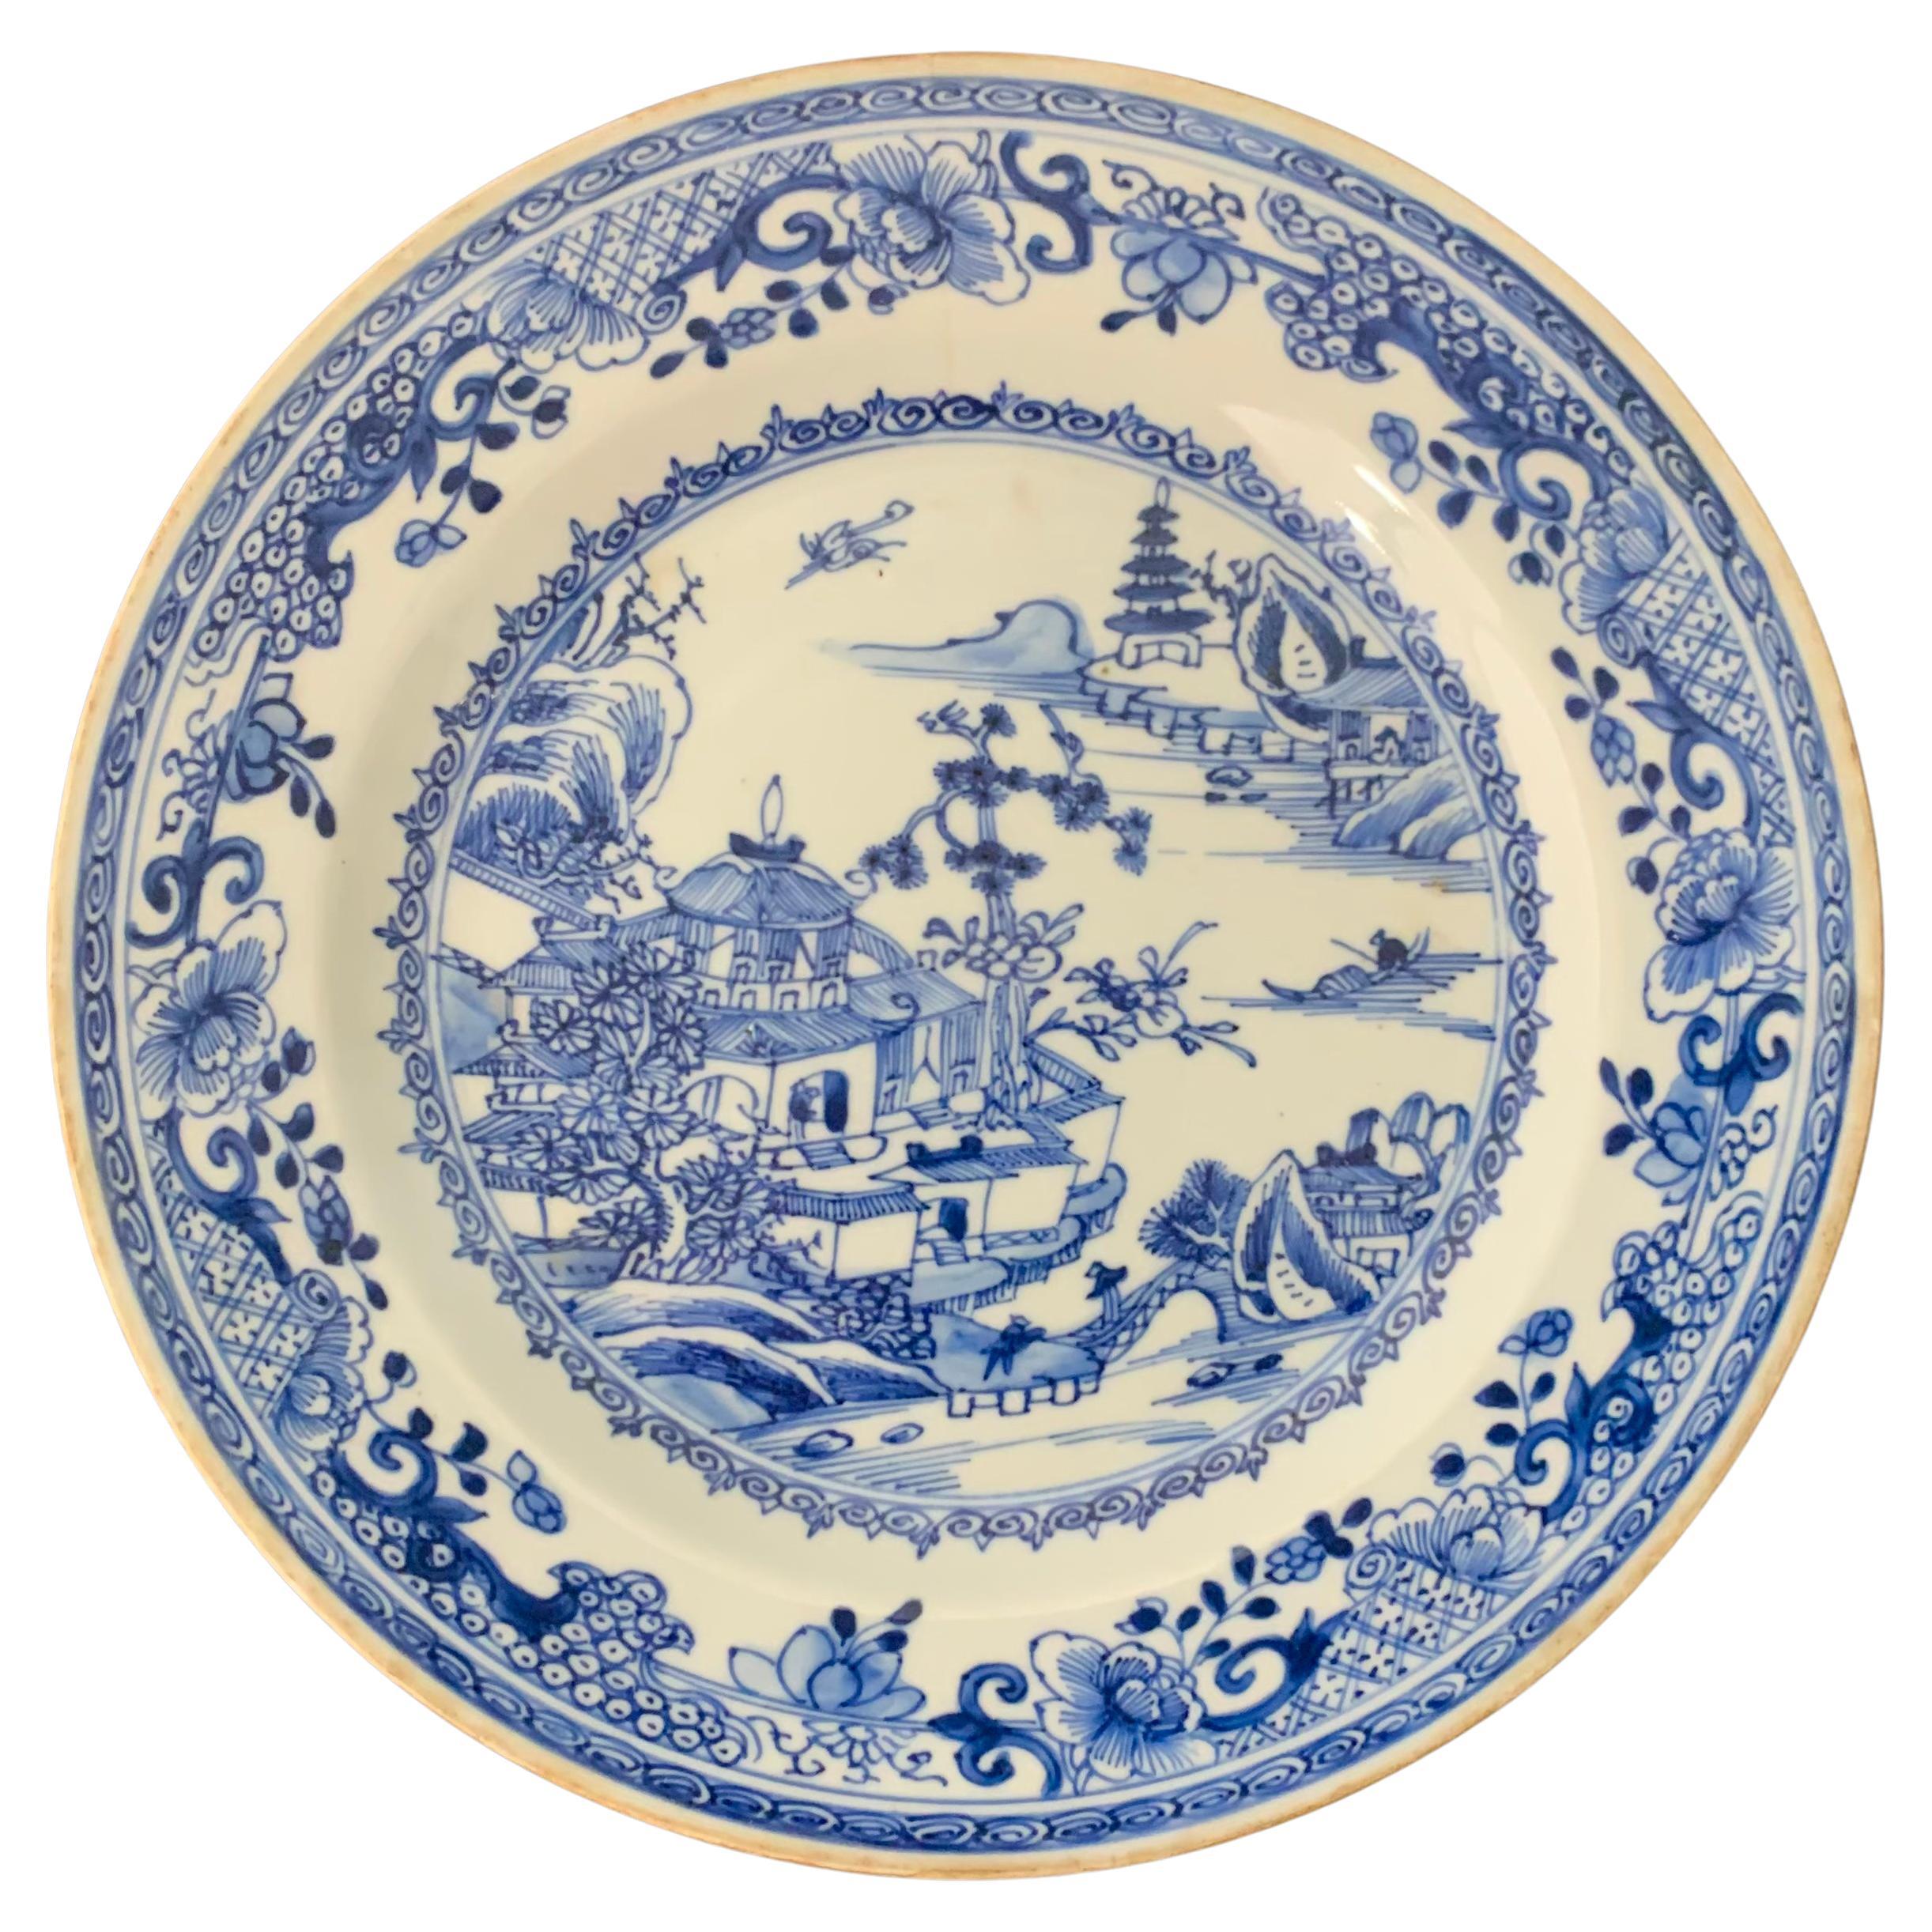 Chinese Plate Inspired by the Blue Family India Compagny, Mid 19th Century